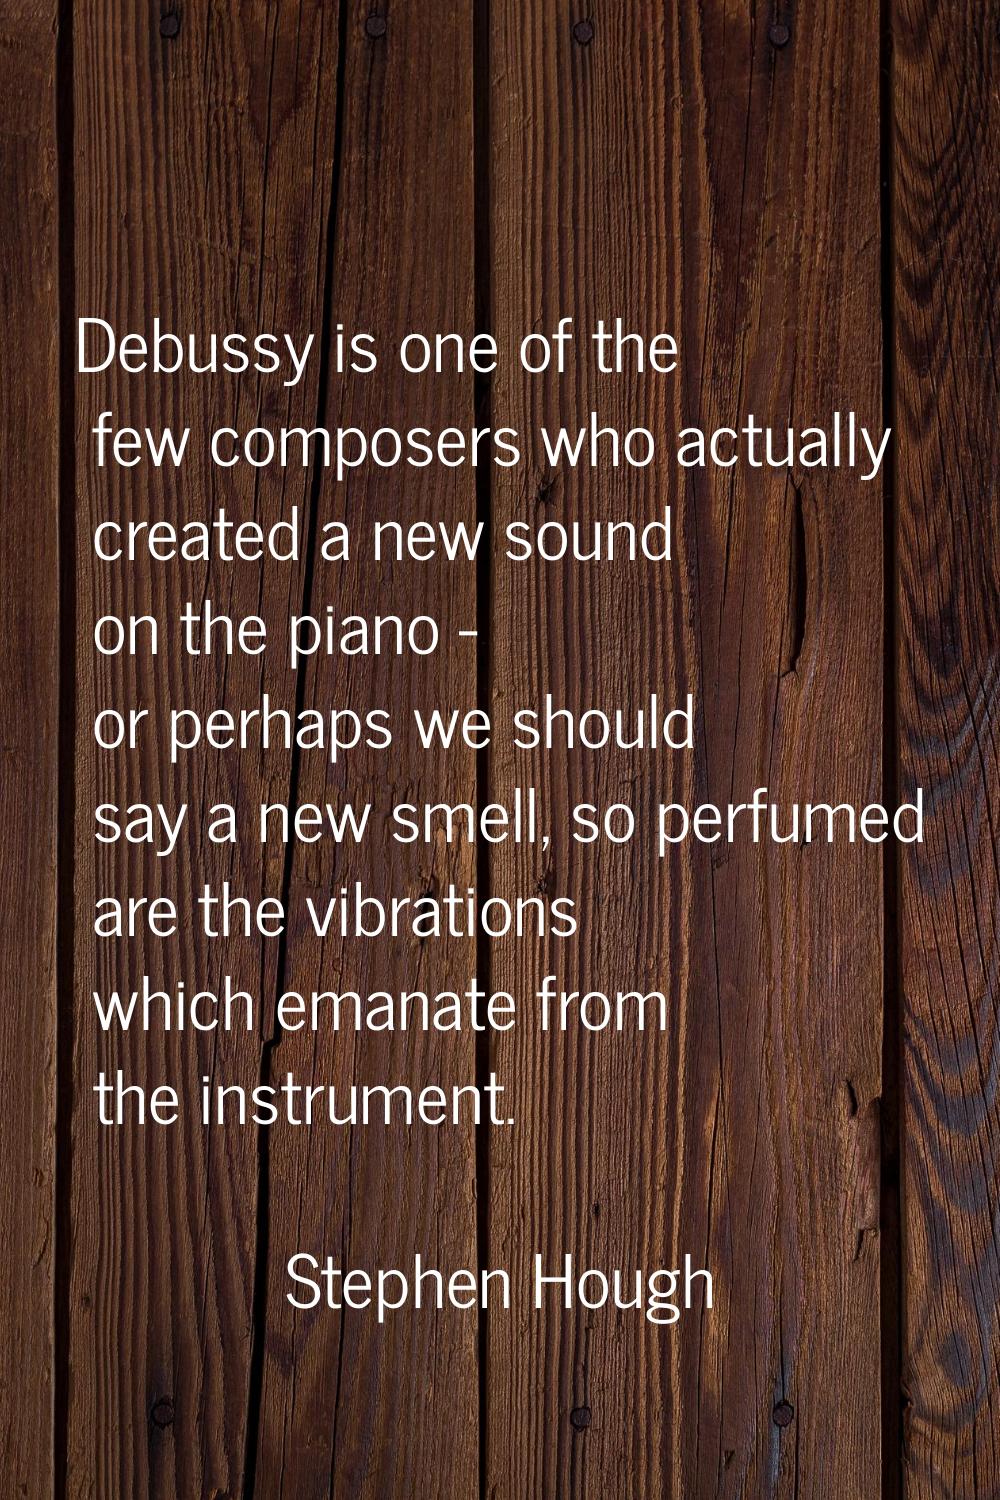 Debussy is one of the few composers who actually created a new sound on the piano - or perhaps we s